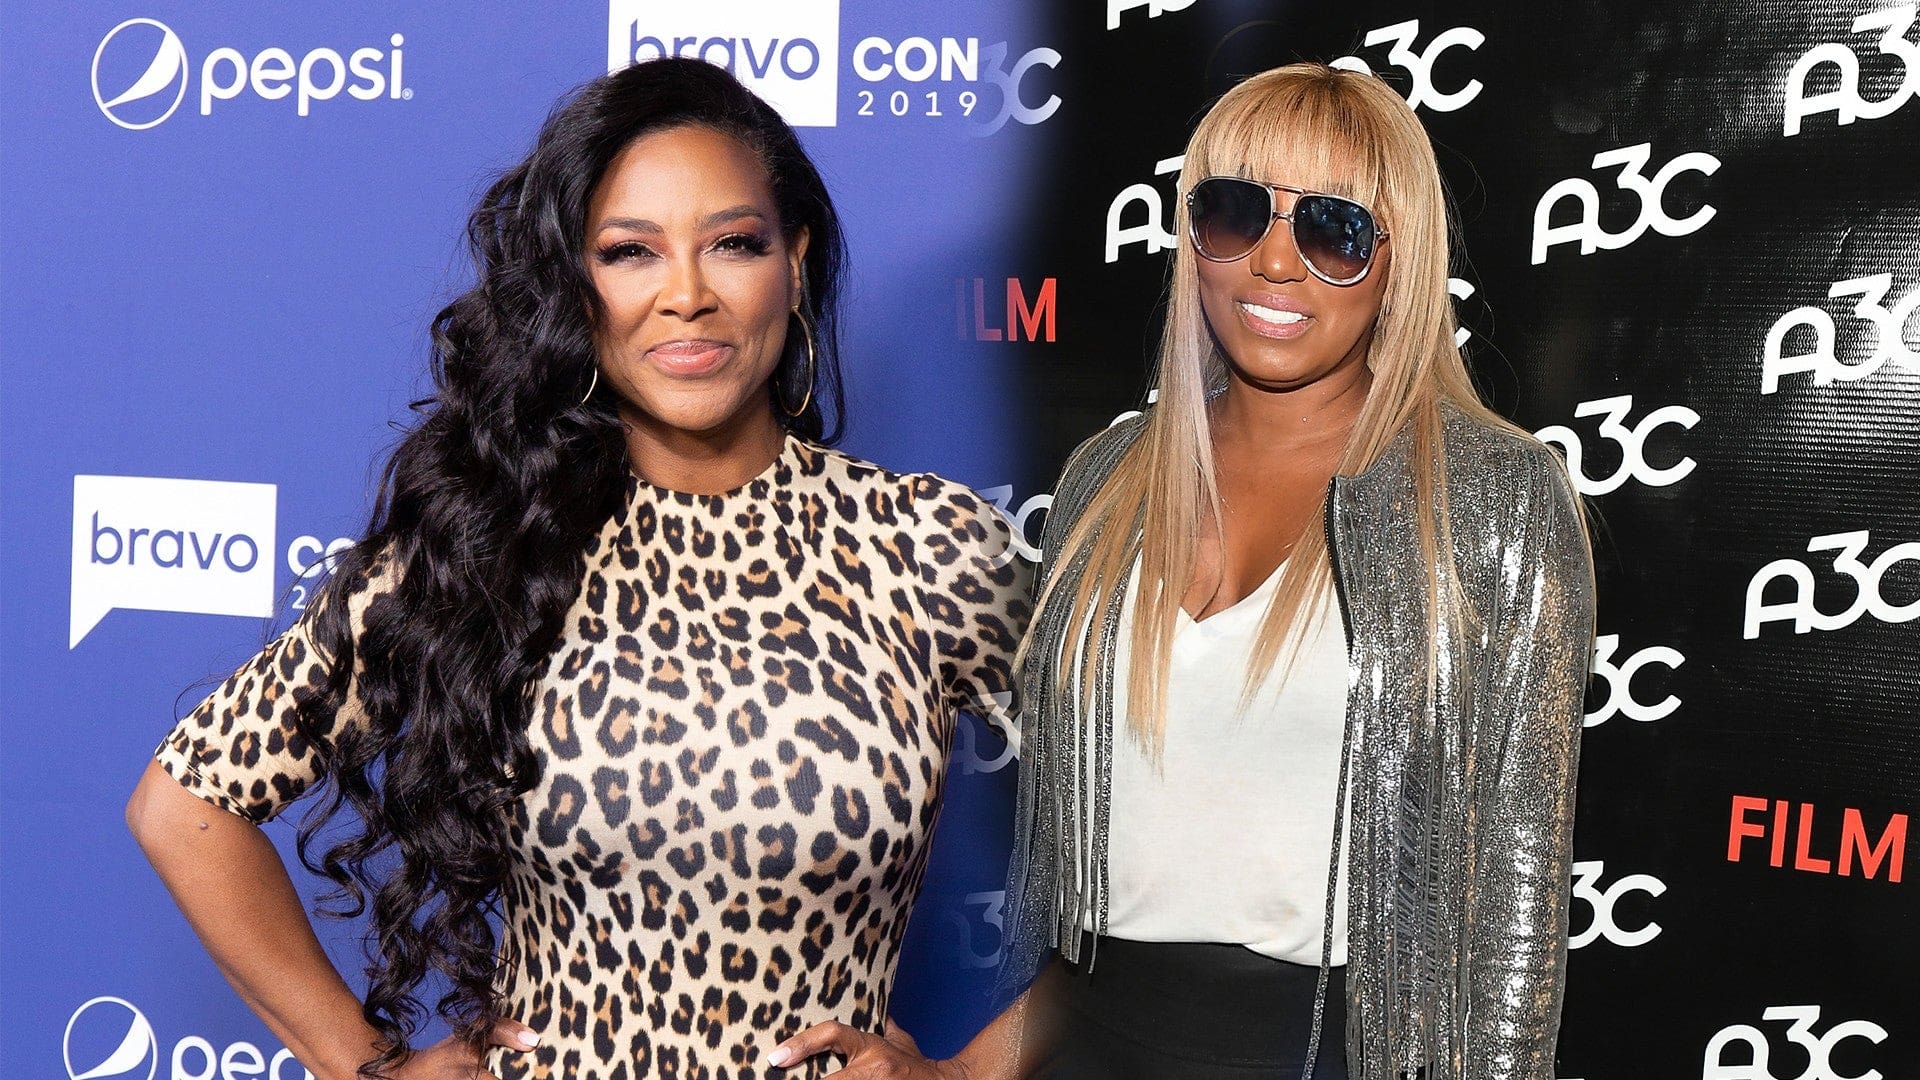 NeNe Leakes Is Ready To Put The Paws On Kenya Moore In This RHOA Clip - Watch It Here